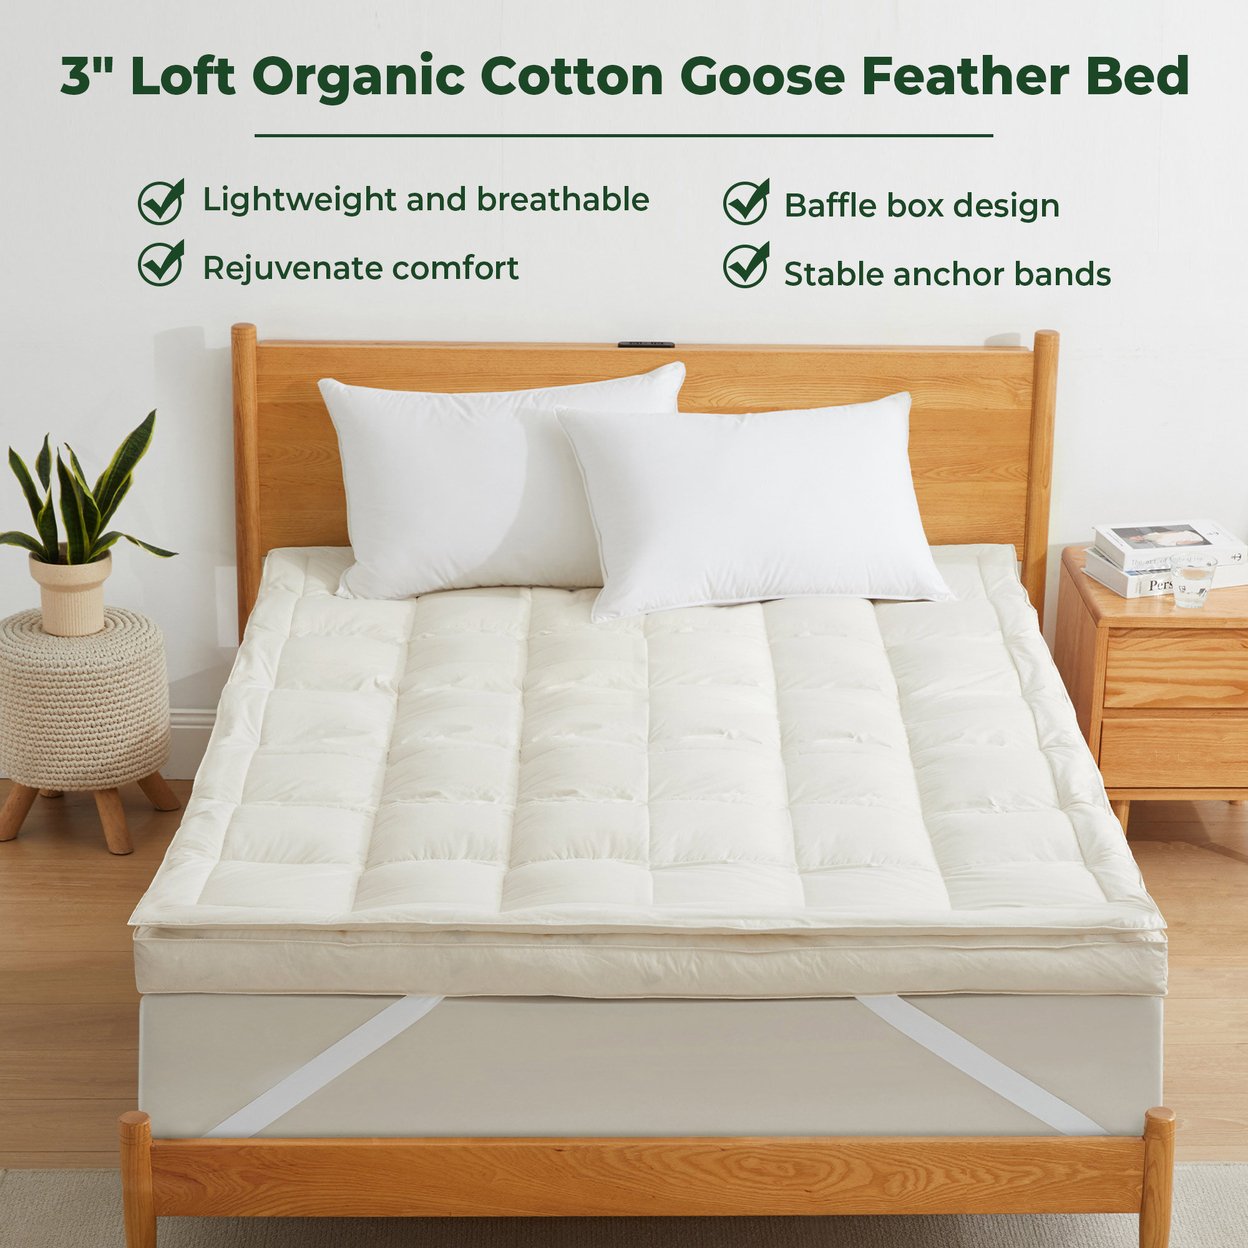 Premium White Goose Feather Mattress Topper, 3 Soft Feather Bed, 300 TC Organic Cotton Cover, Eco-friendly And Breathable - Twin, White